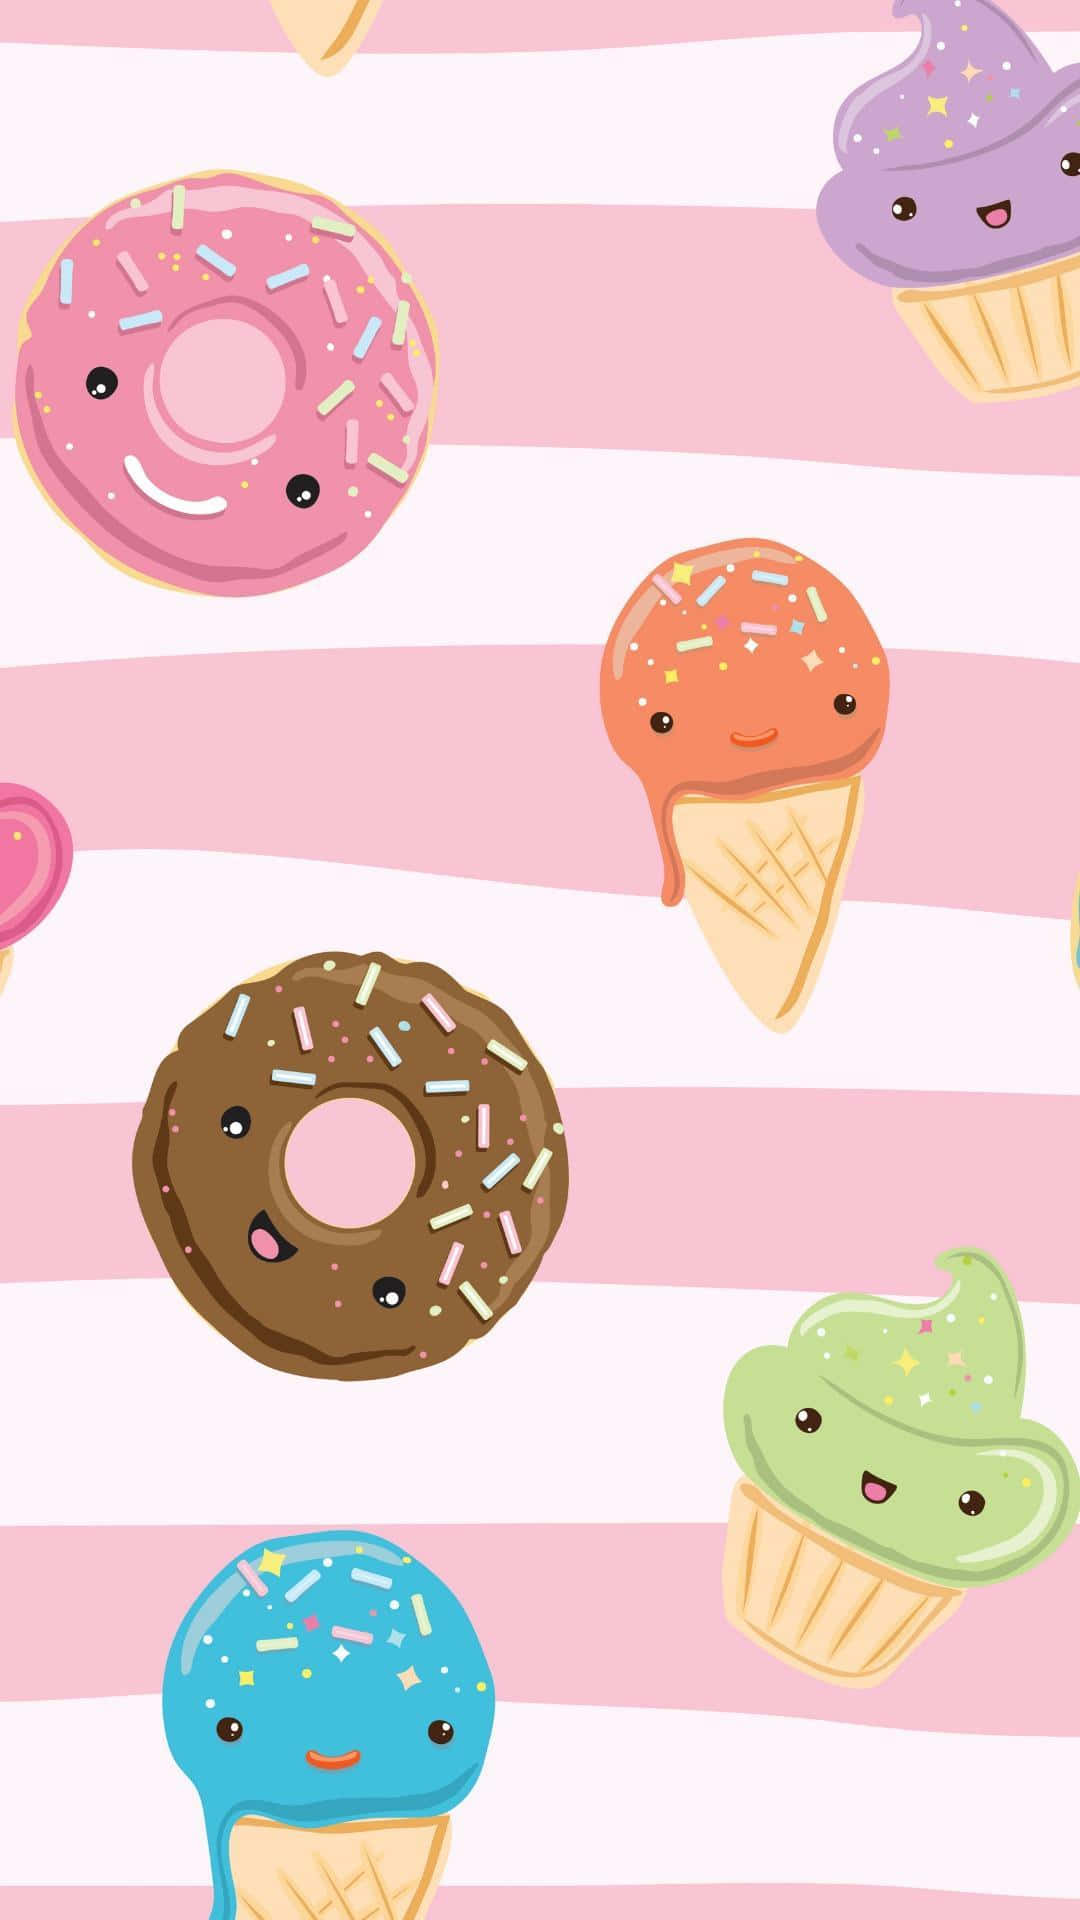 “Whip Up Your Next Delicious Meal with Your Cute Food Iphone” Wallpaper